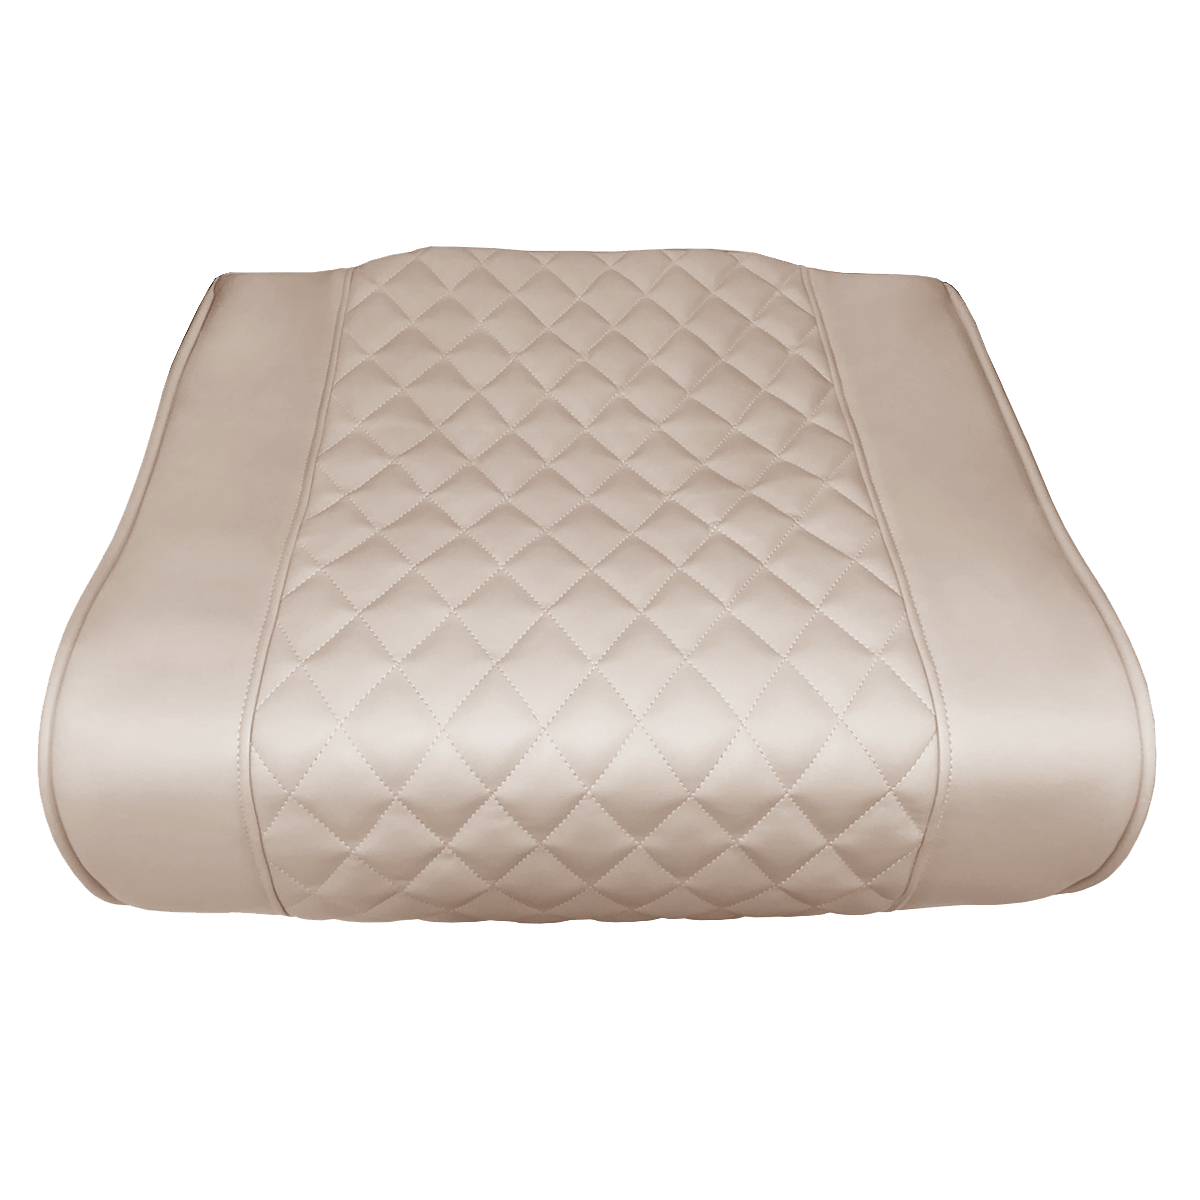 Whale Spa Khaki Diamond PU Leather Seat | Replacement Pedicure Chair Parts